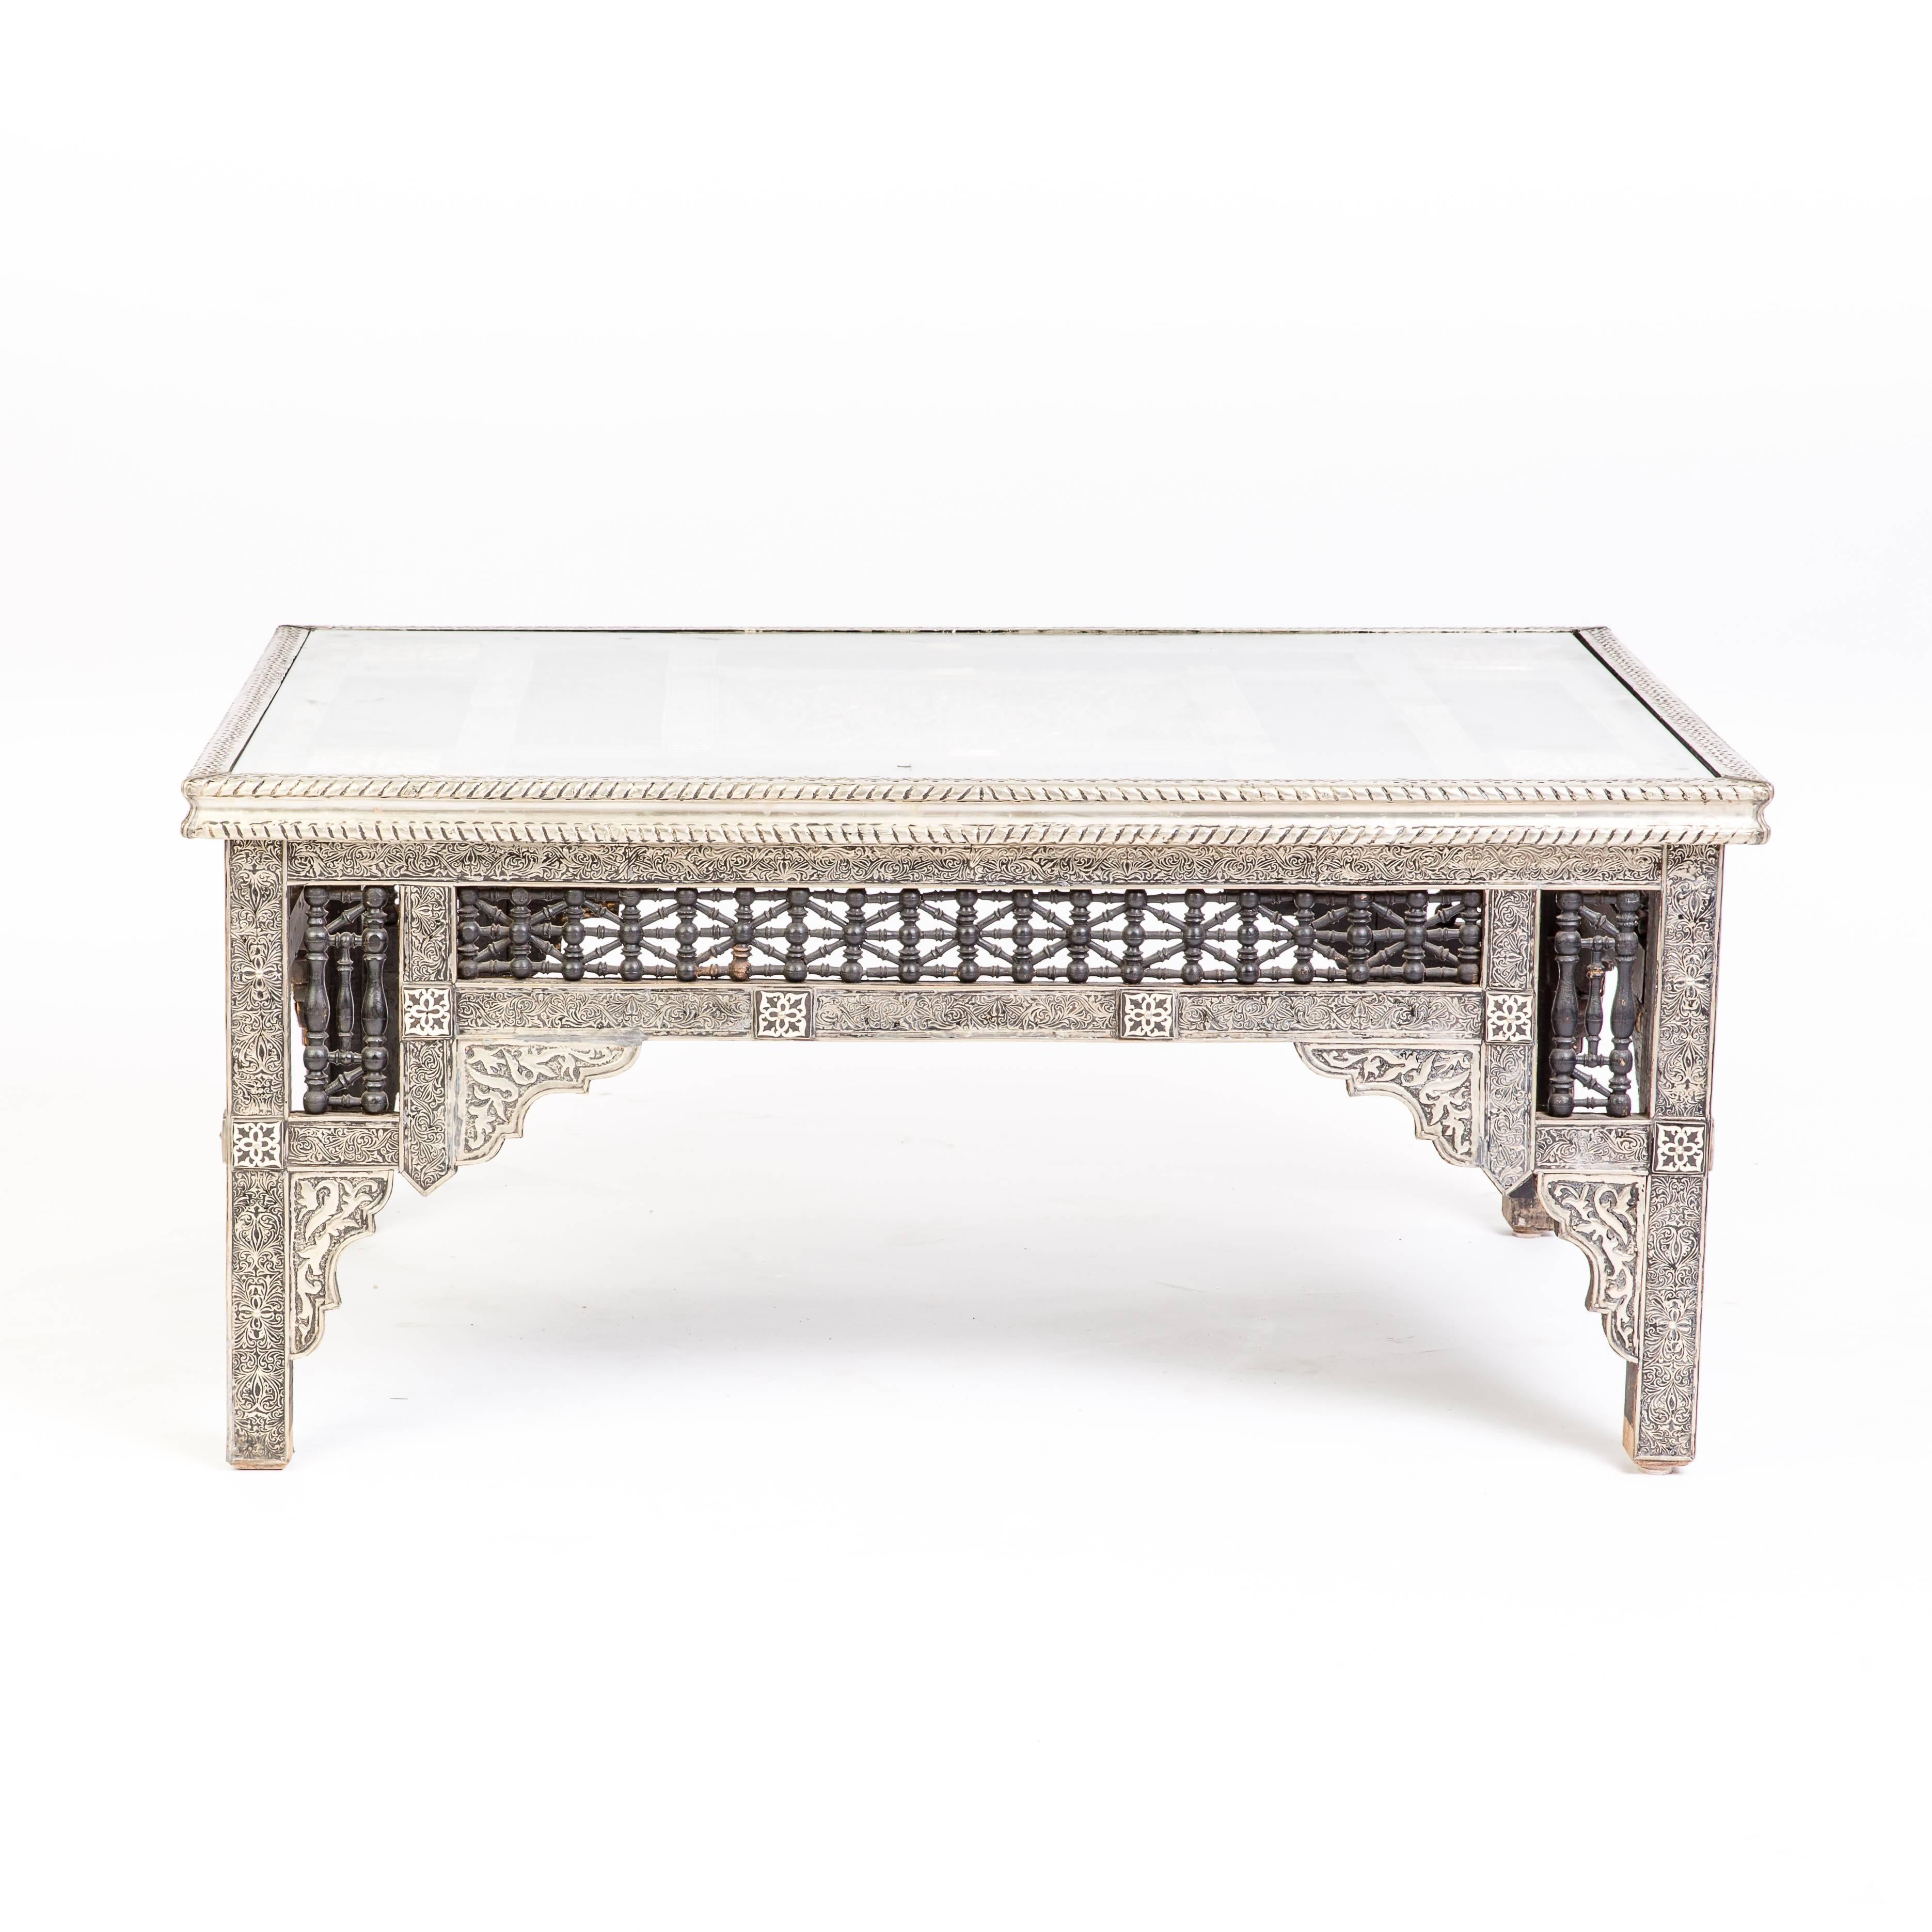 This is an exquisite silver inlaid coffee table with glass purchased from an artisan in Marrakech. This is a one of a kind piece with very intricate detailing. 

Measures: 45